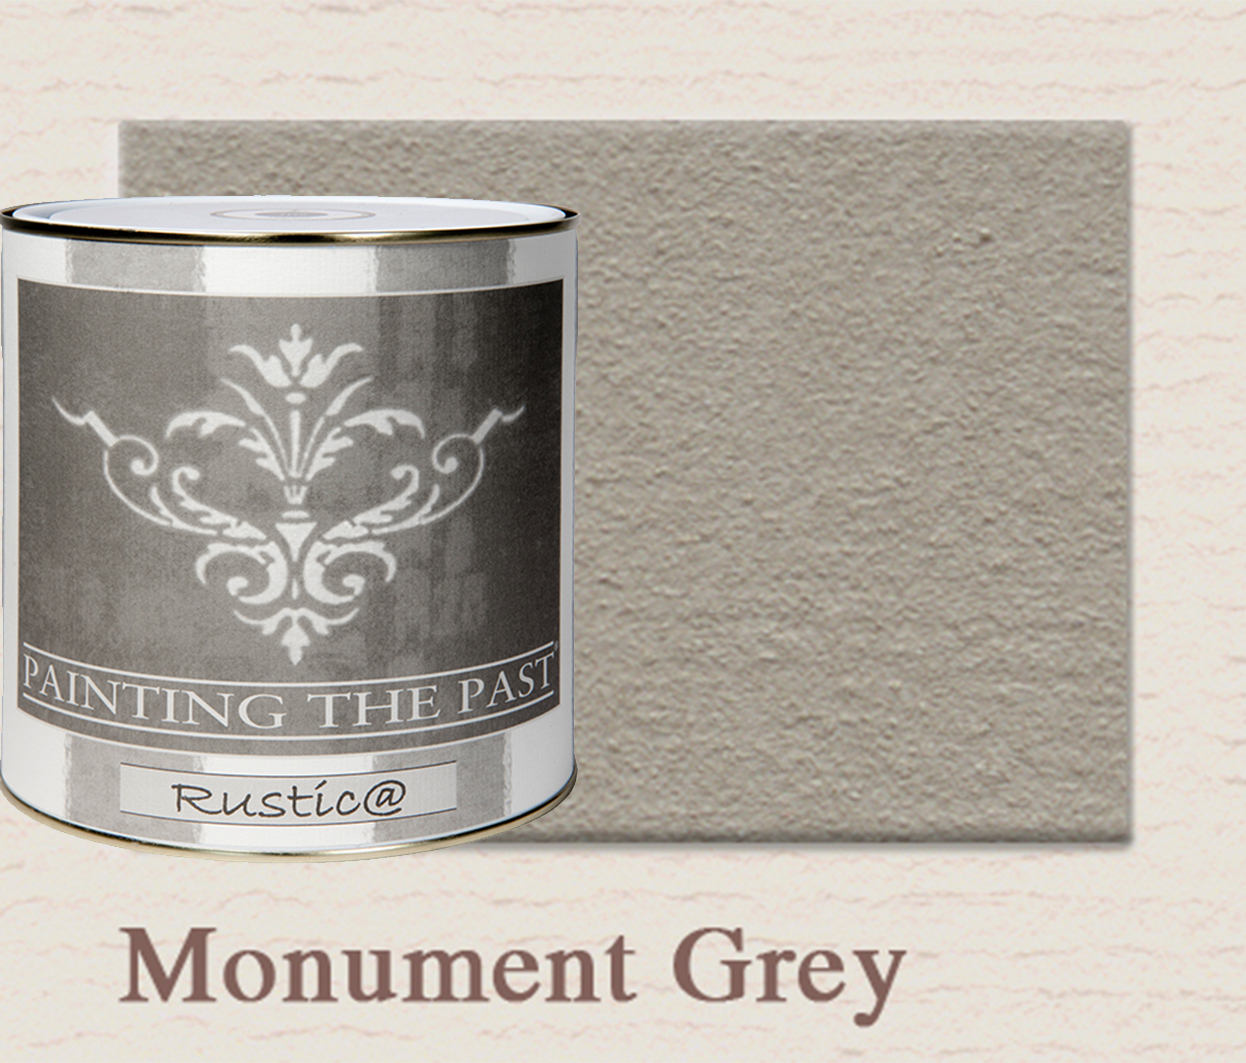 Painting The Past Rustica Monument Grey